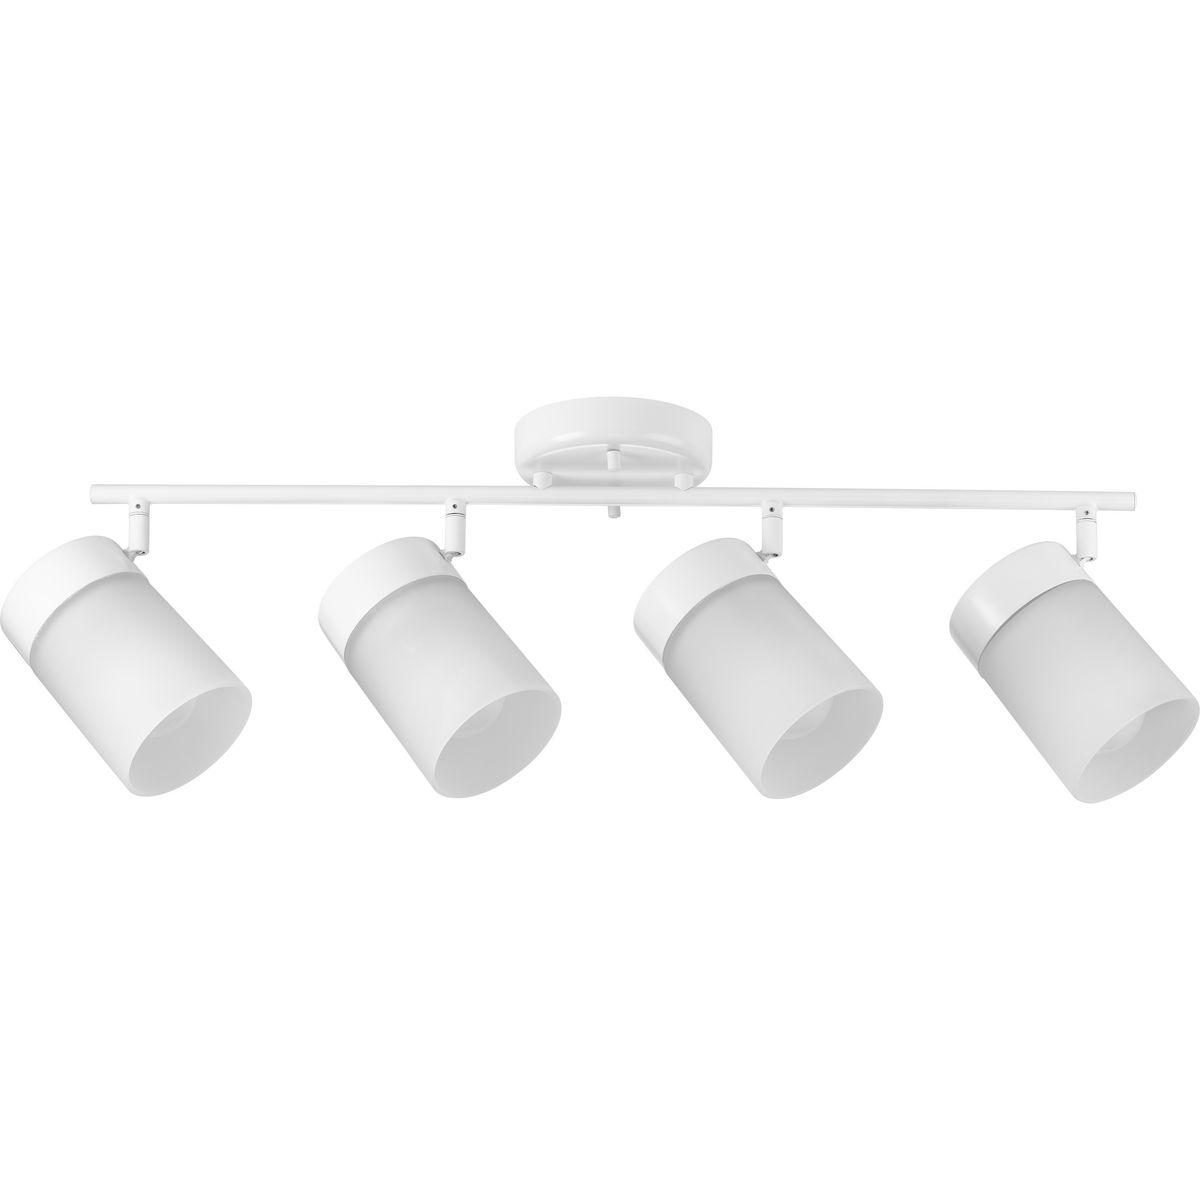 Hubbell P900012-028 Infuse an abundance of sophisticated versatile light to an commercial or residential setting with this brushed nickel four-head track light fixture. Multi-directional lamp heads provide design flexibility and illuminate typically hard-to-reach areas. The 